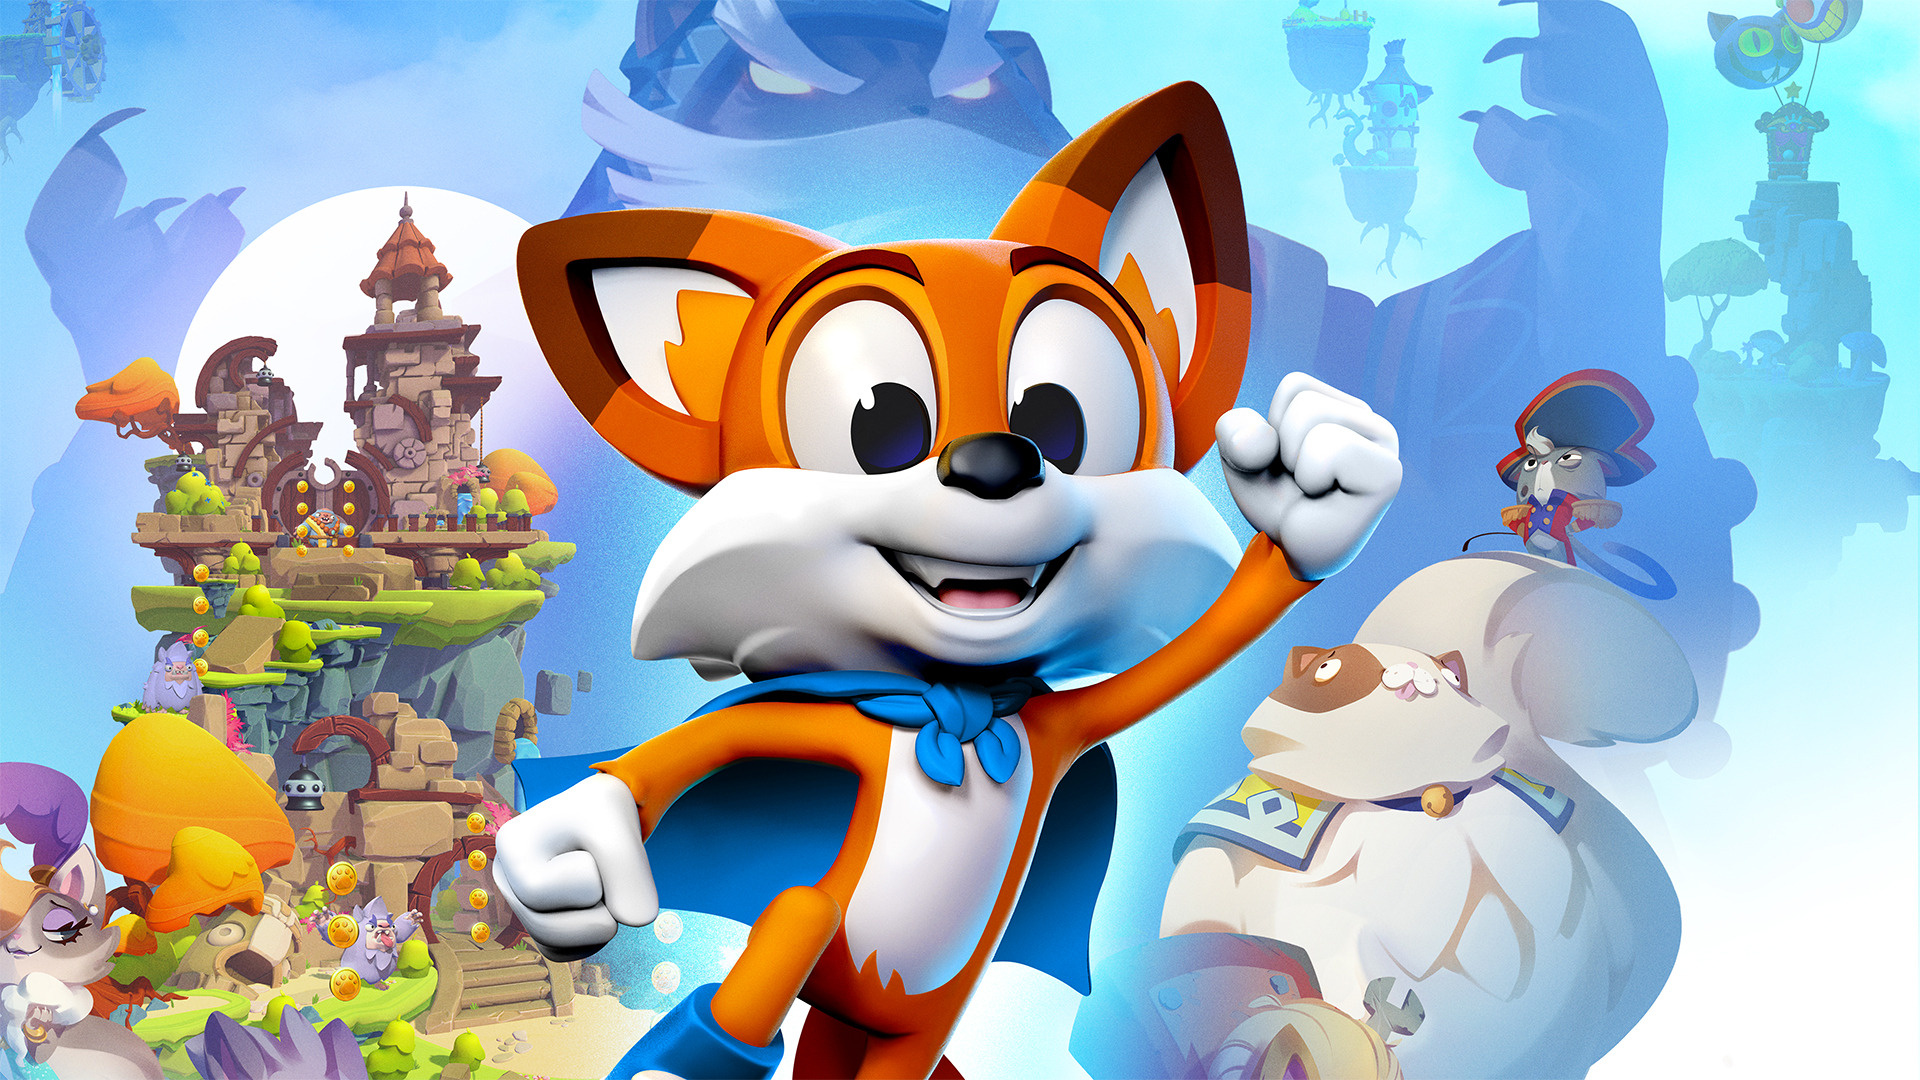 new super lucky's tale ps4